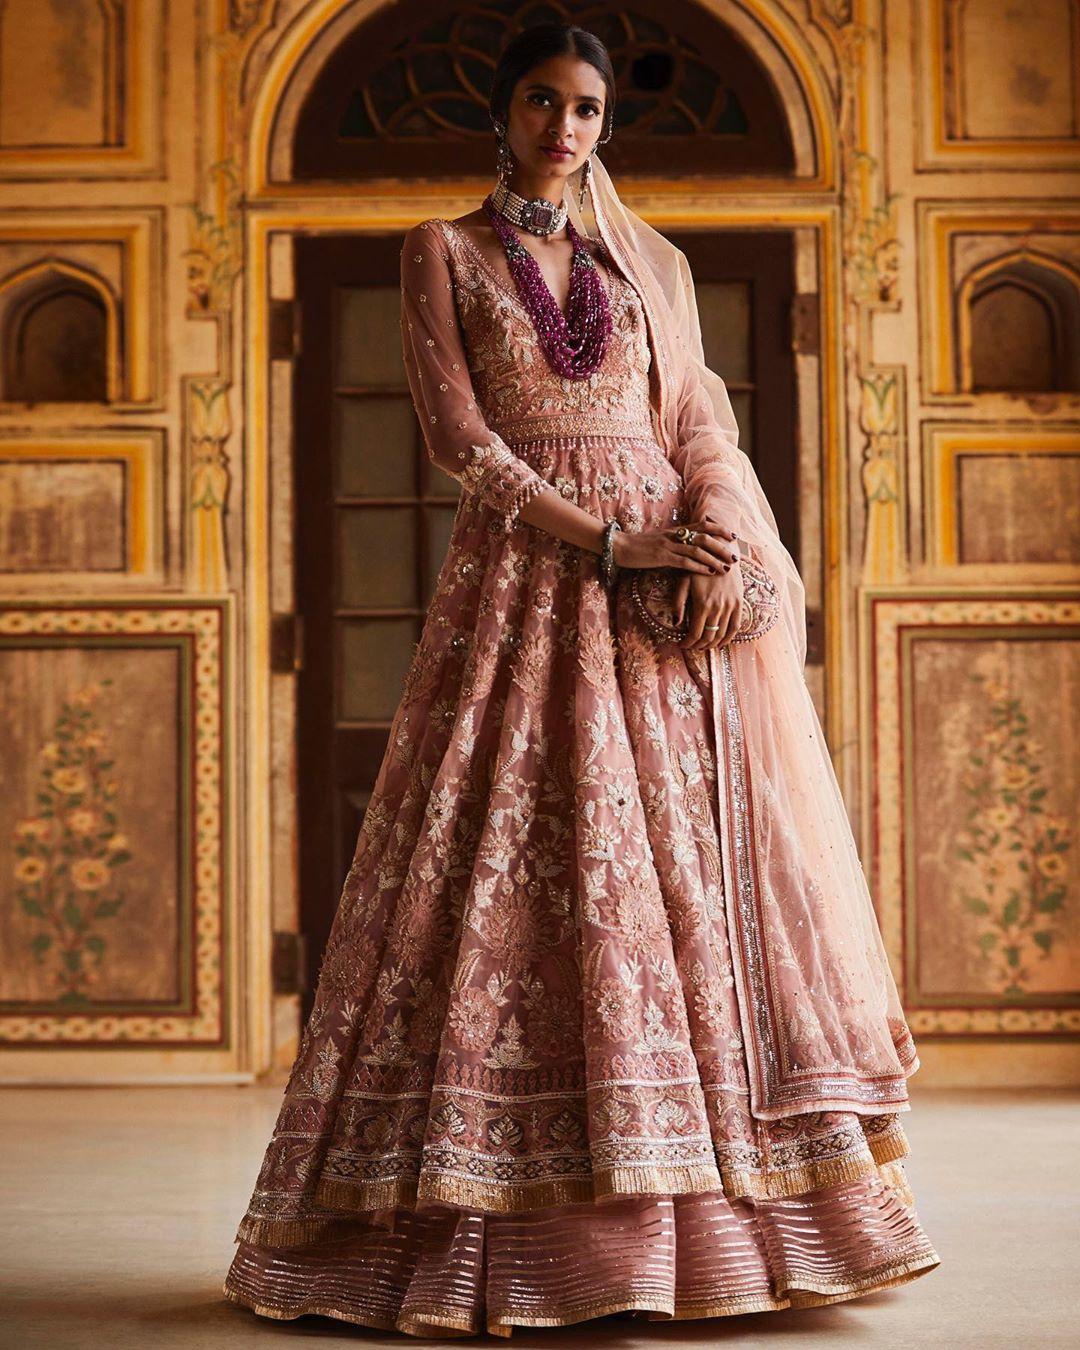 Indian Wedding Dresses - Shop Indian Bridal Wear in USA with Free Shipping